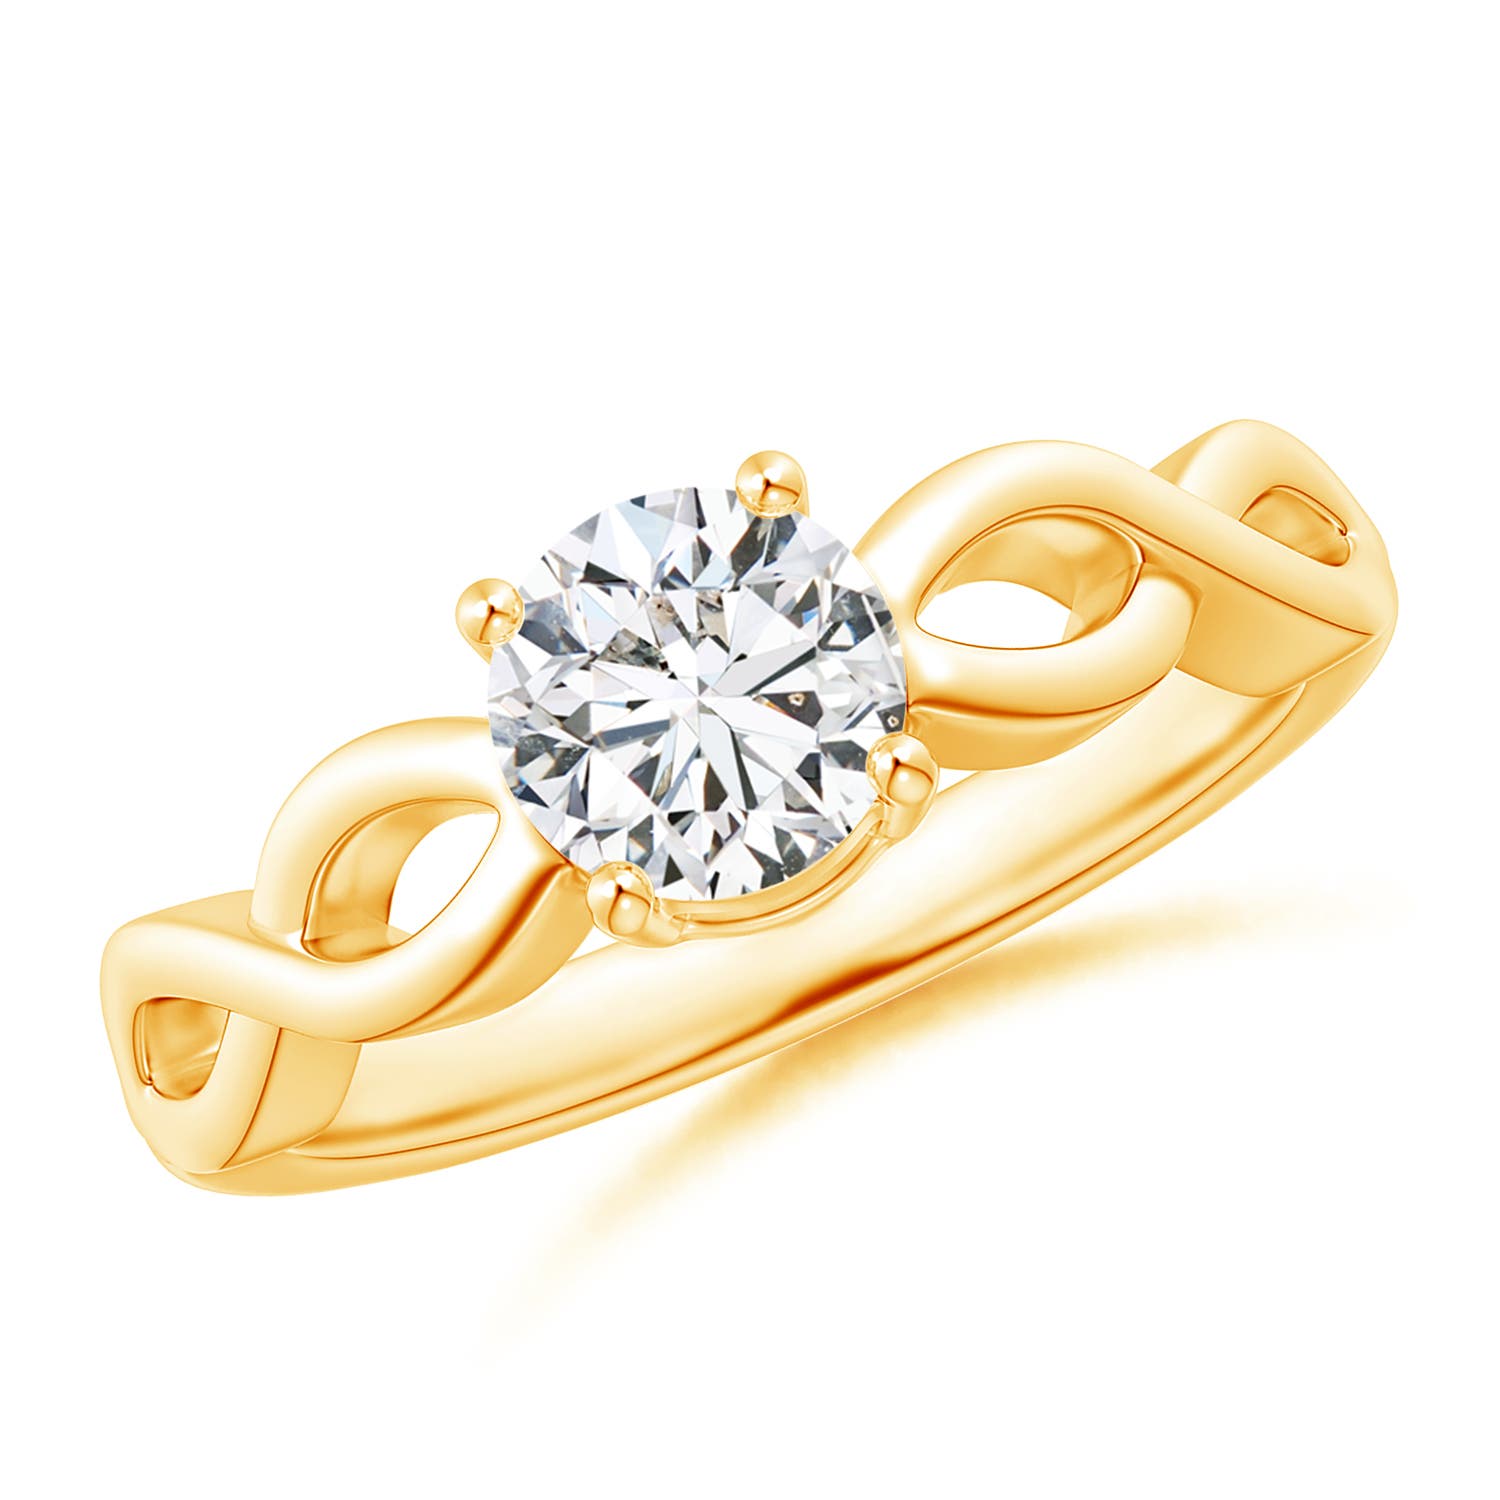 H, SI2 / 0.8 CT / 14 KT Yellow Gold